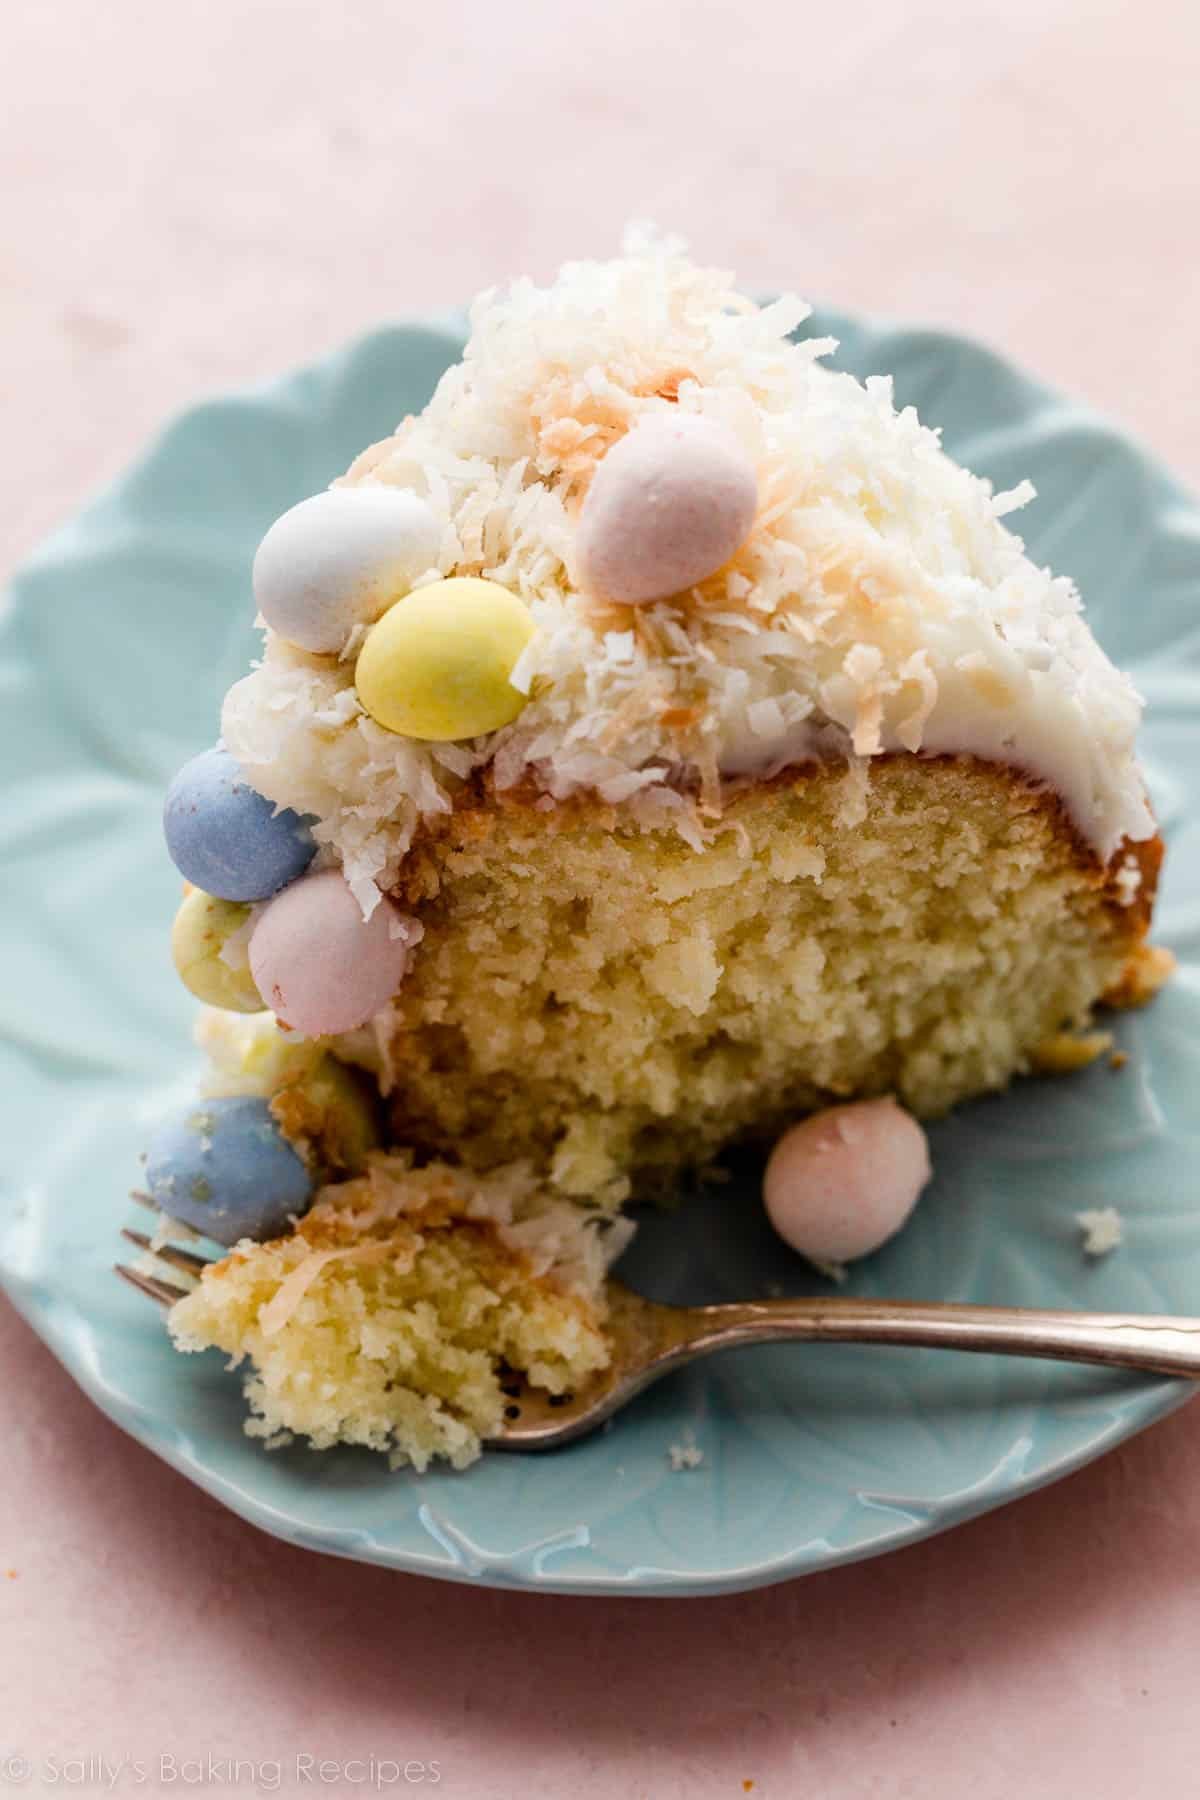 slice of coconut Bundt cake topped with cream cheese frosting and Easter chocolate egg candies on blue plate.